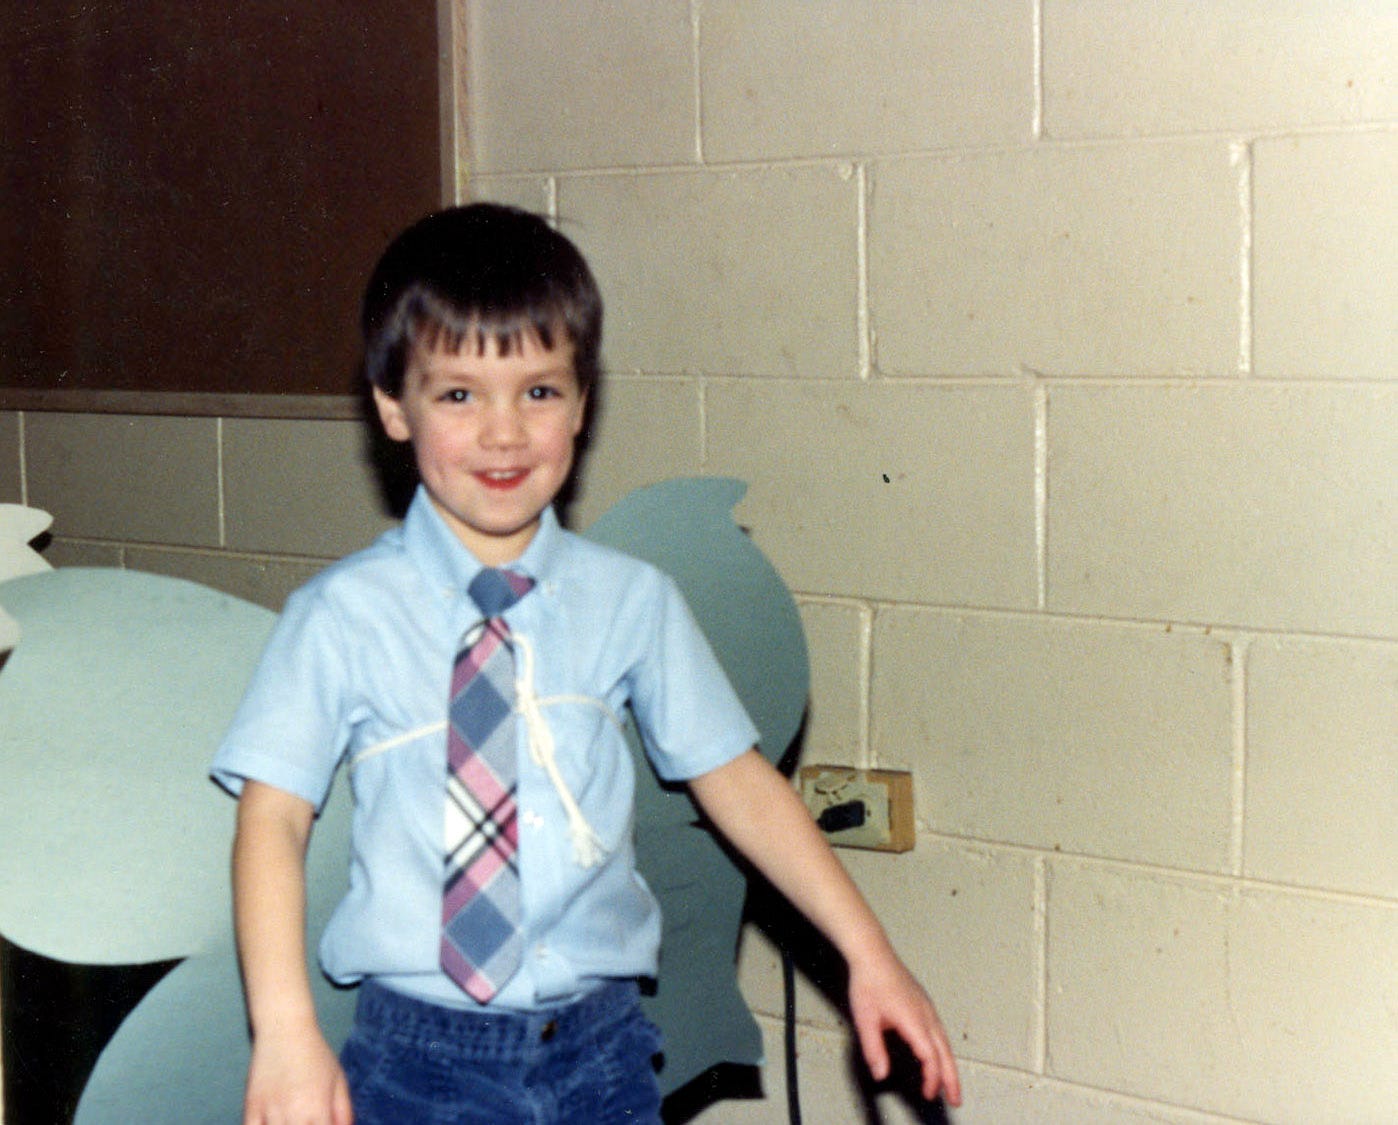 mental sweeney -- Rob Sweeney, was expelled from the Hales Corners Lutheran Pre-School at the age of 4 after throwing a chair over a balcony. He's wearing angel wings here.Ê  ------ Photos for Meg Kissinger story about Rob Sweeney and his mother, Debbie Sweeney, desperate attempt to find him a place to live in California. Rob, 25, grew up in Hales Corners and graduated from Whitnall High School. He suffered from a nervous breakdown in college and was diagnosed with schizo-effective illness, a combination of symptoms: mania, depression, delusions, paranoia. For the past seven years, Rob has been hospitalized 10 times in Milwaukee. He keeps getting kicked out of the places where he lives Ð apartments, group homes, even homeless shelters. ÒHe wonÕt follow the rules,Ó said his mother, Debbie Sweeney. She hopes that she can find a place for Rob where he can live safely, have a job or go to school and make a life for himself. - Photo by Meg Kissinger / mkissinger@jrn.com